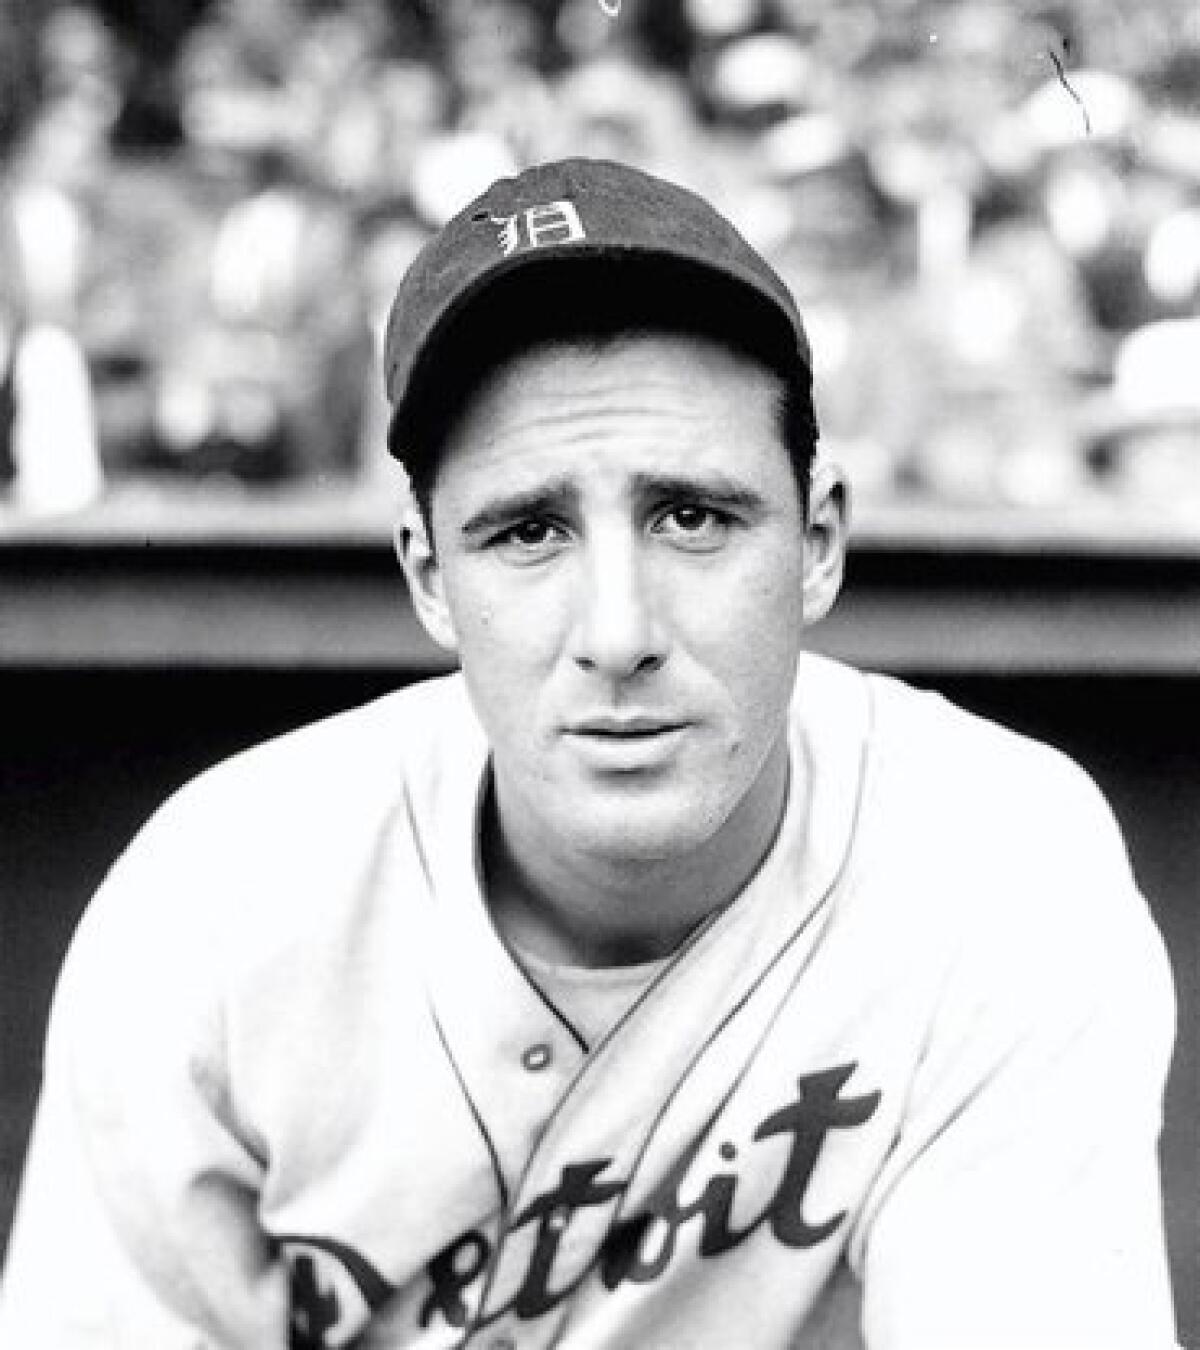 Hank Greenberg, first baseman for the Detroit Tigers, in this 1934 photo.